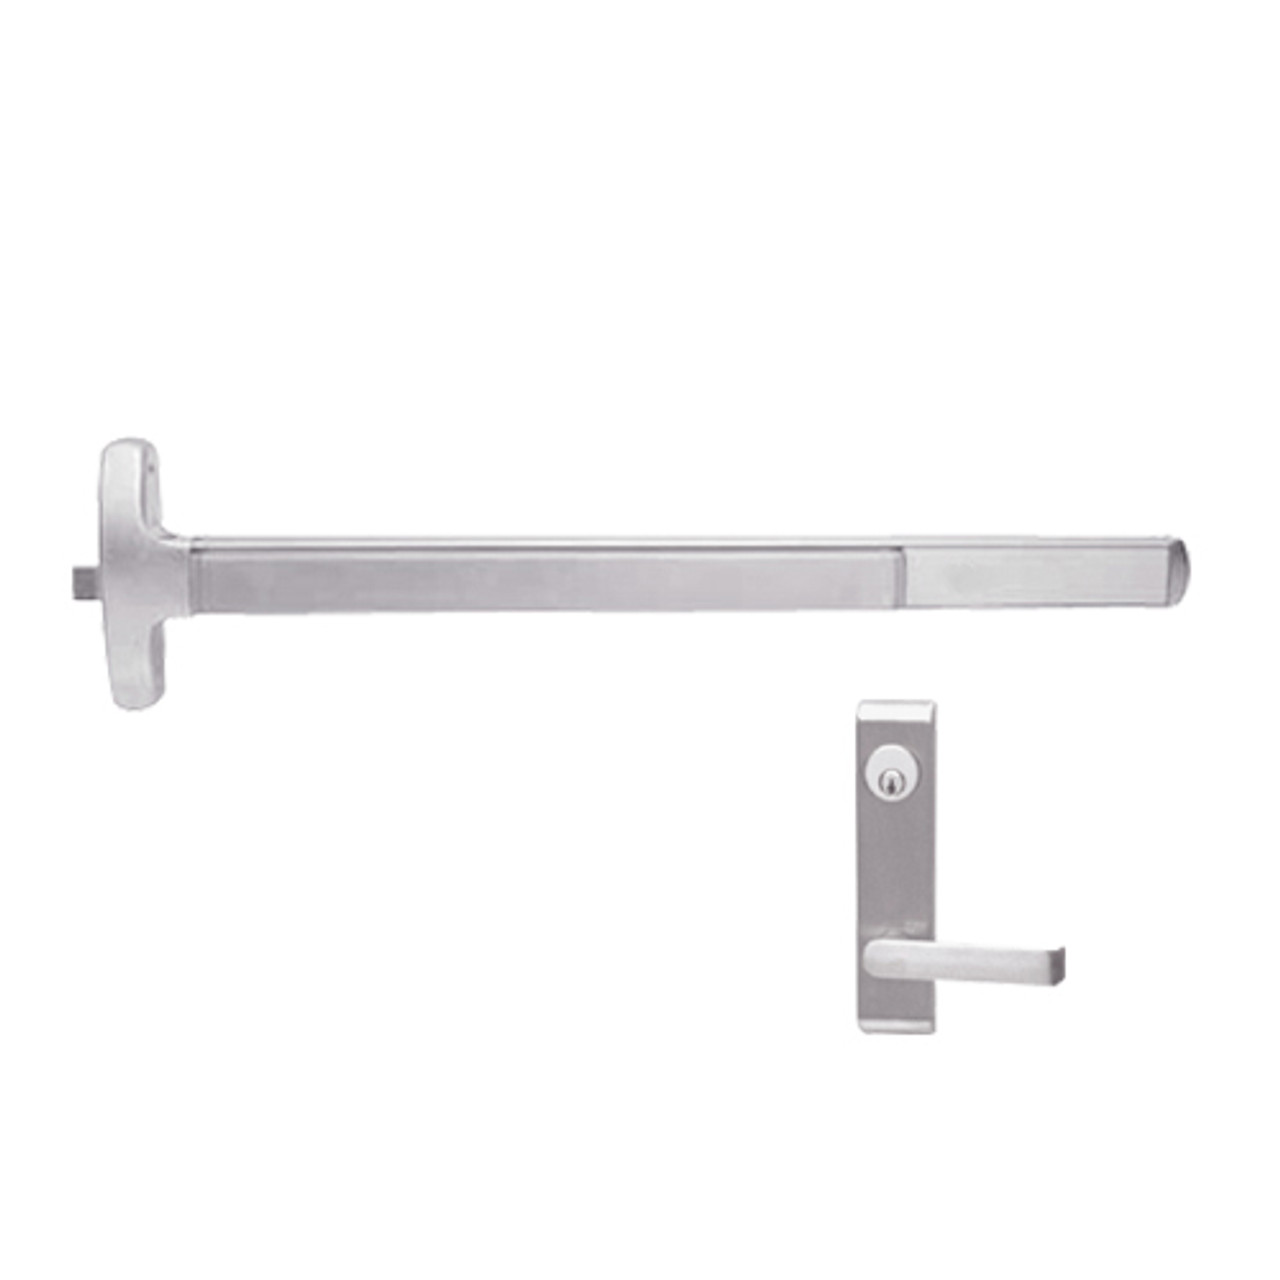 F-24-R-L-DANE-US32-3-LHR Falcon Exit Device in Polished Stainless Steel